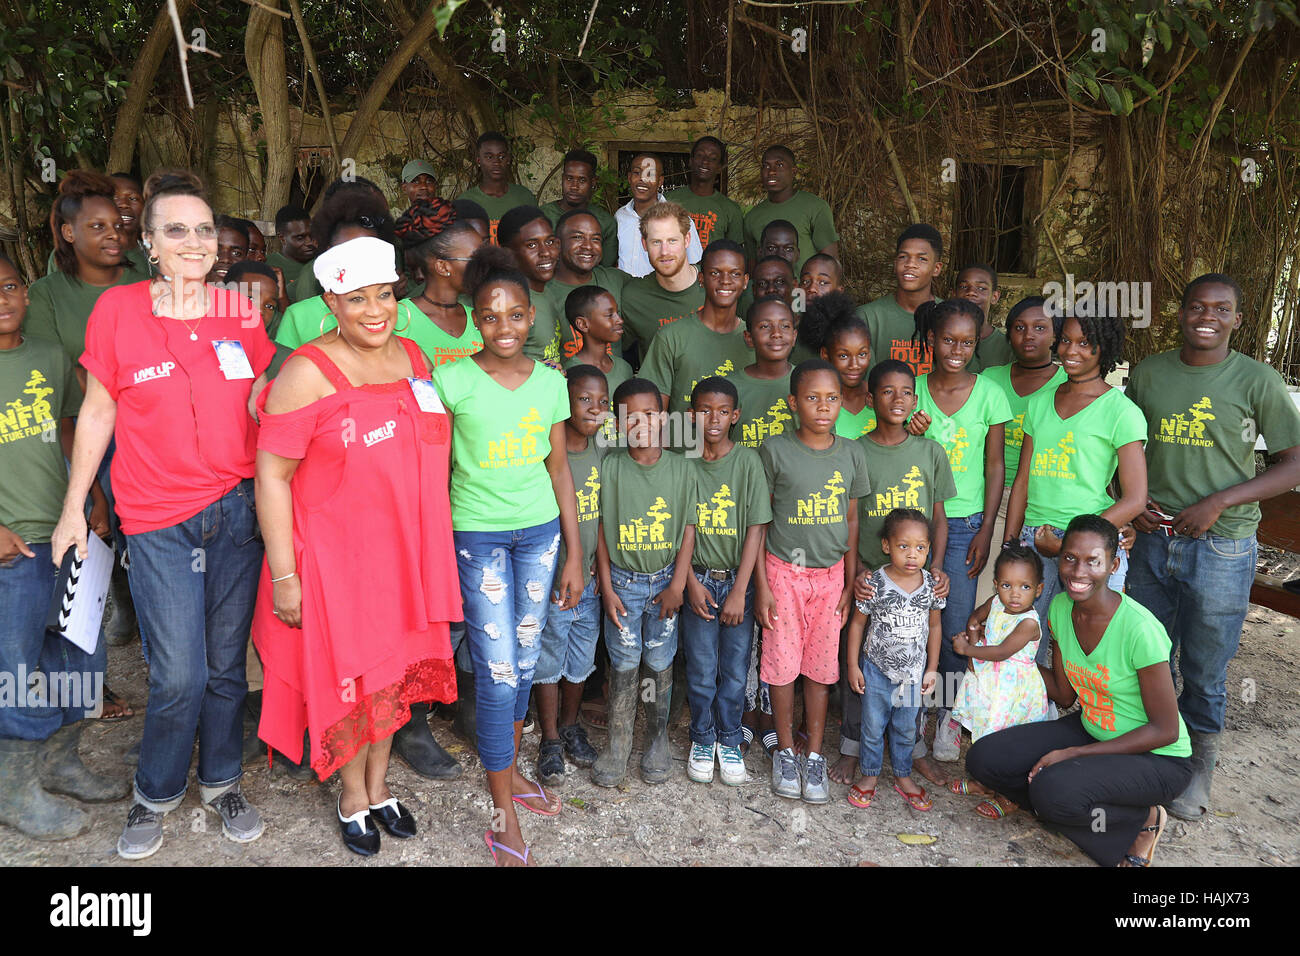 Prince Harry poses with volunteers during a visit to 'Nature Fun Ranch', which allows young people to speak freely with one another about important topics, including HIV/AIDS, providing them with a positive focus to guide their lives in the right direction, during his tour of the Caribbean. Stock Photo